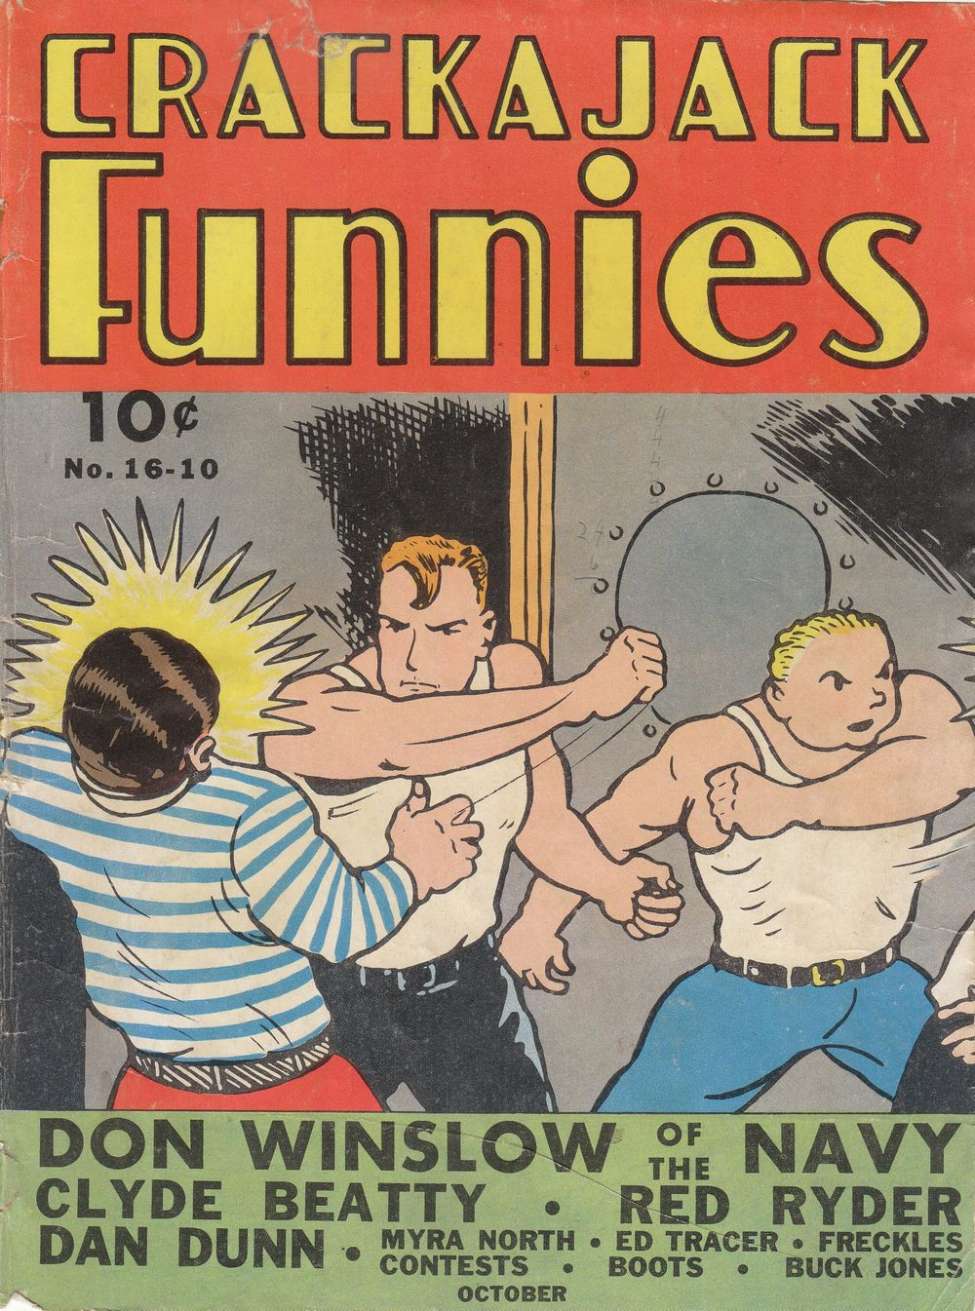 Book Cover For Crackajack Funnies 16